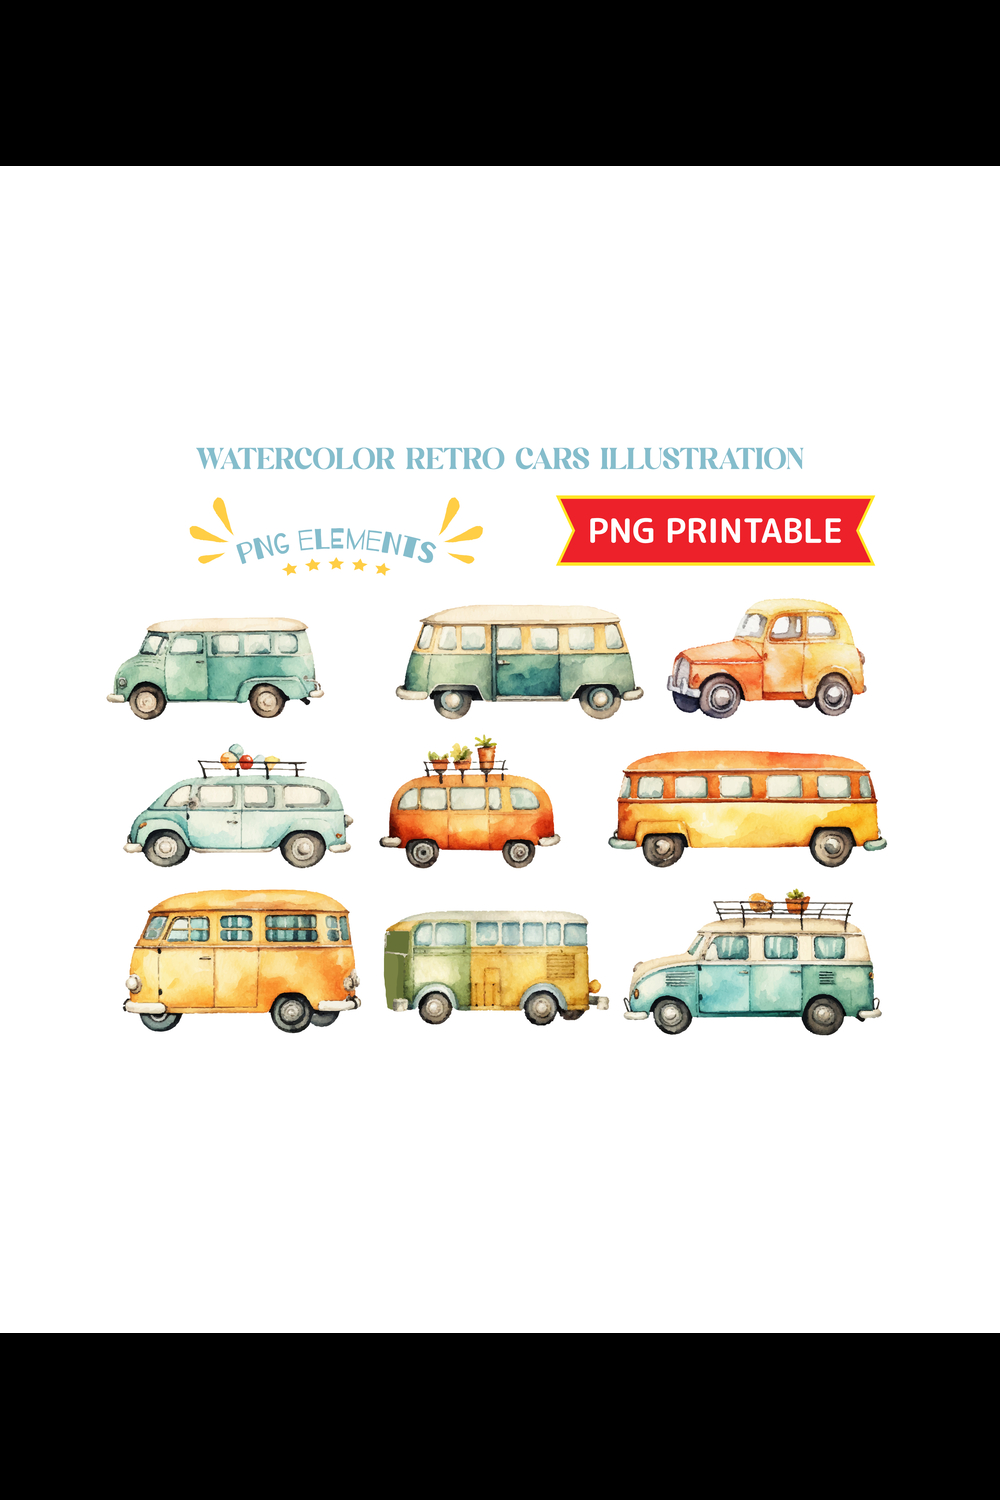 Watercolor vintage hand drawn retro cars illustration pinterest preview image.